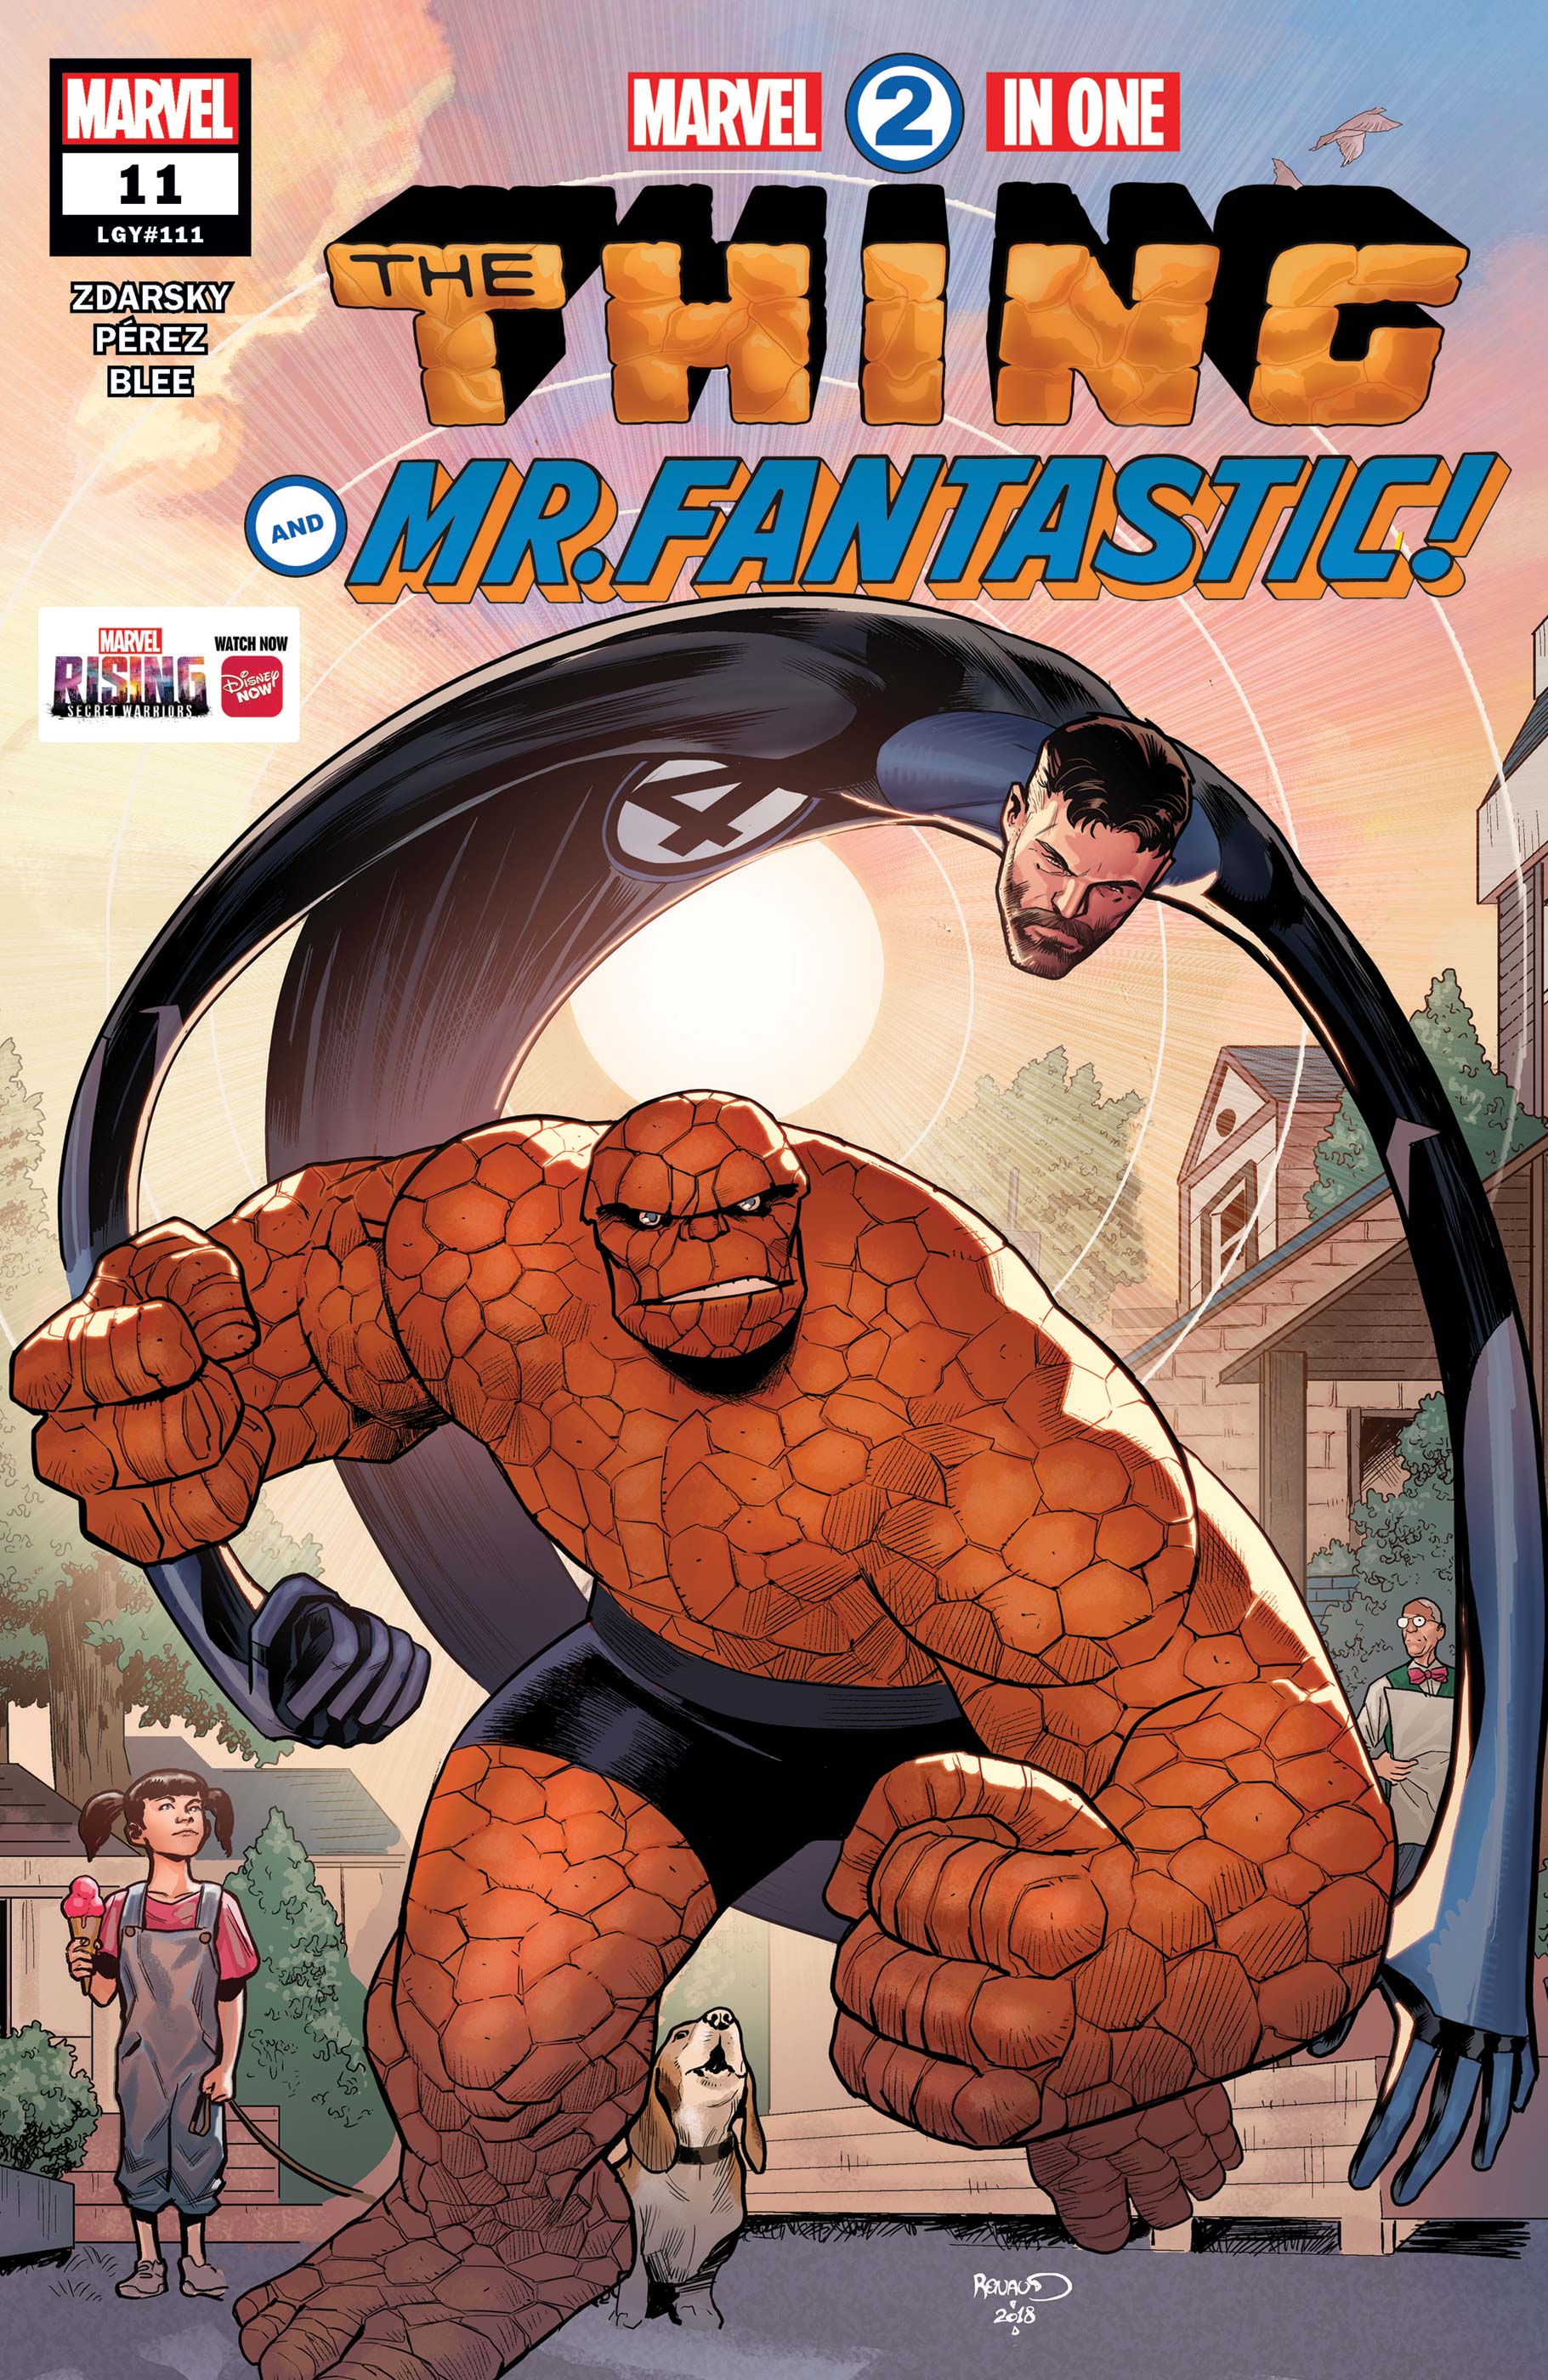 Marvel 2-in-One (2017) #11